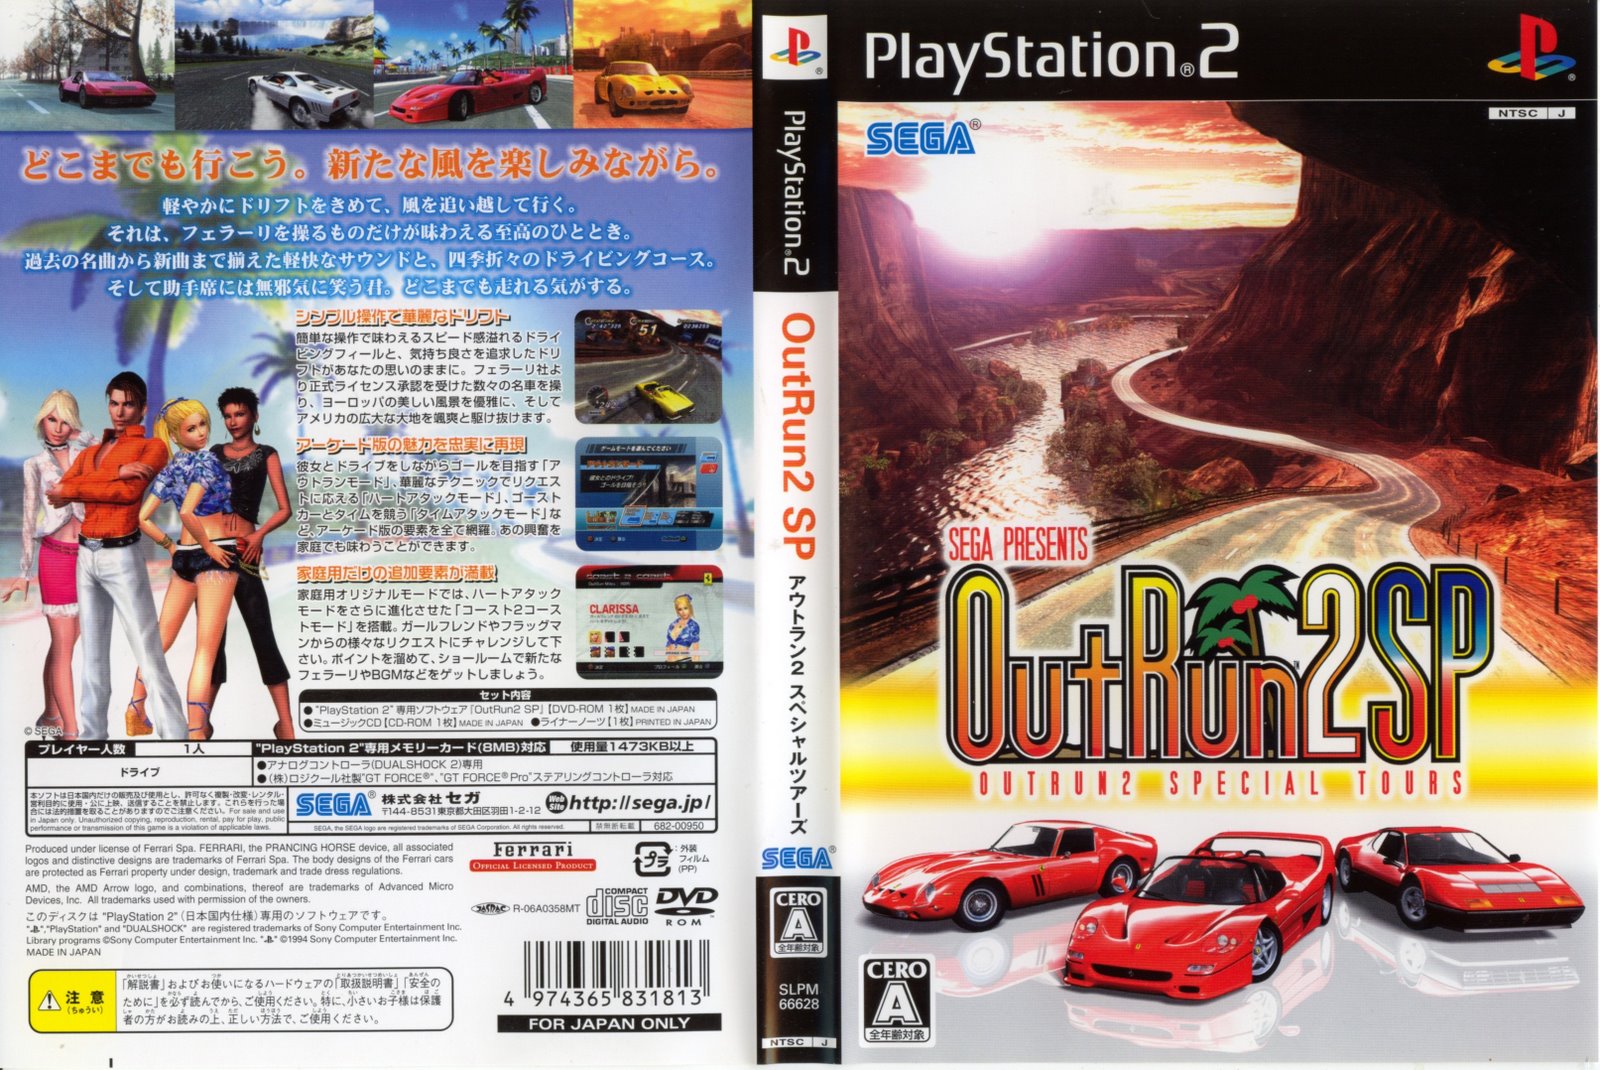 [Outrun_2_Sp_Special_Tours_Japanese_NTSC-[cdcovers_cc]-front.jpg]